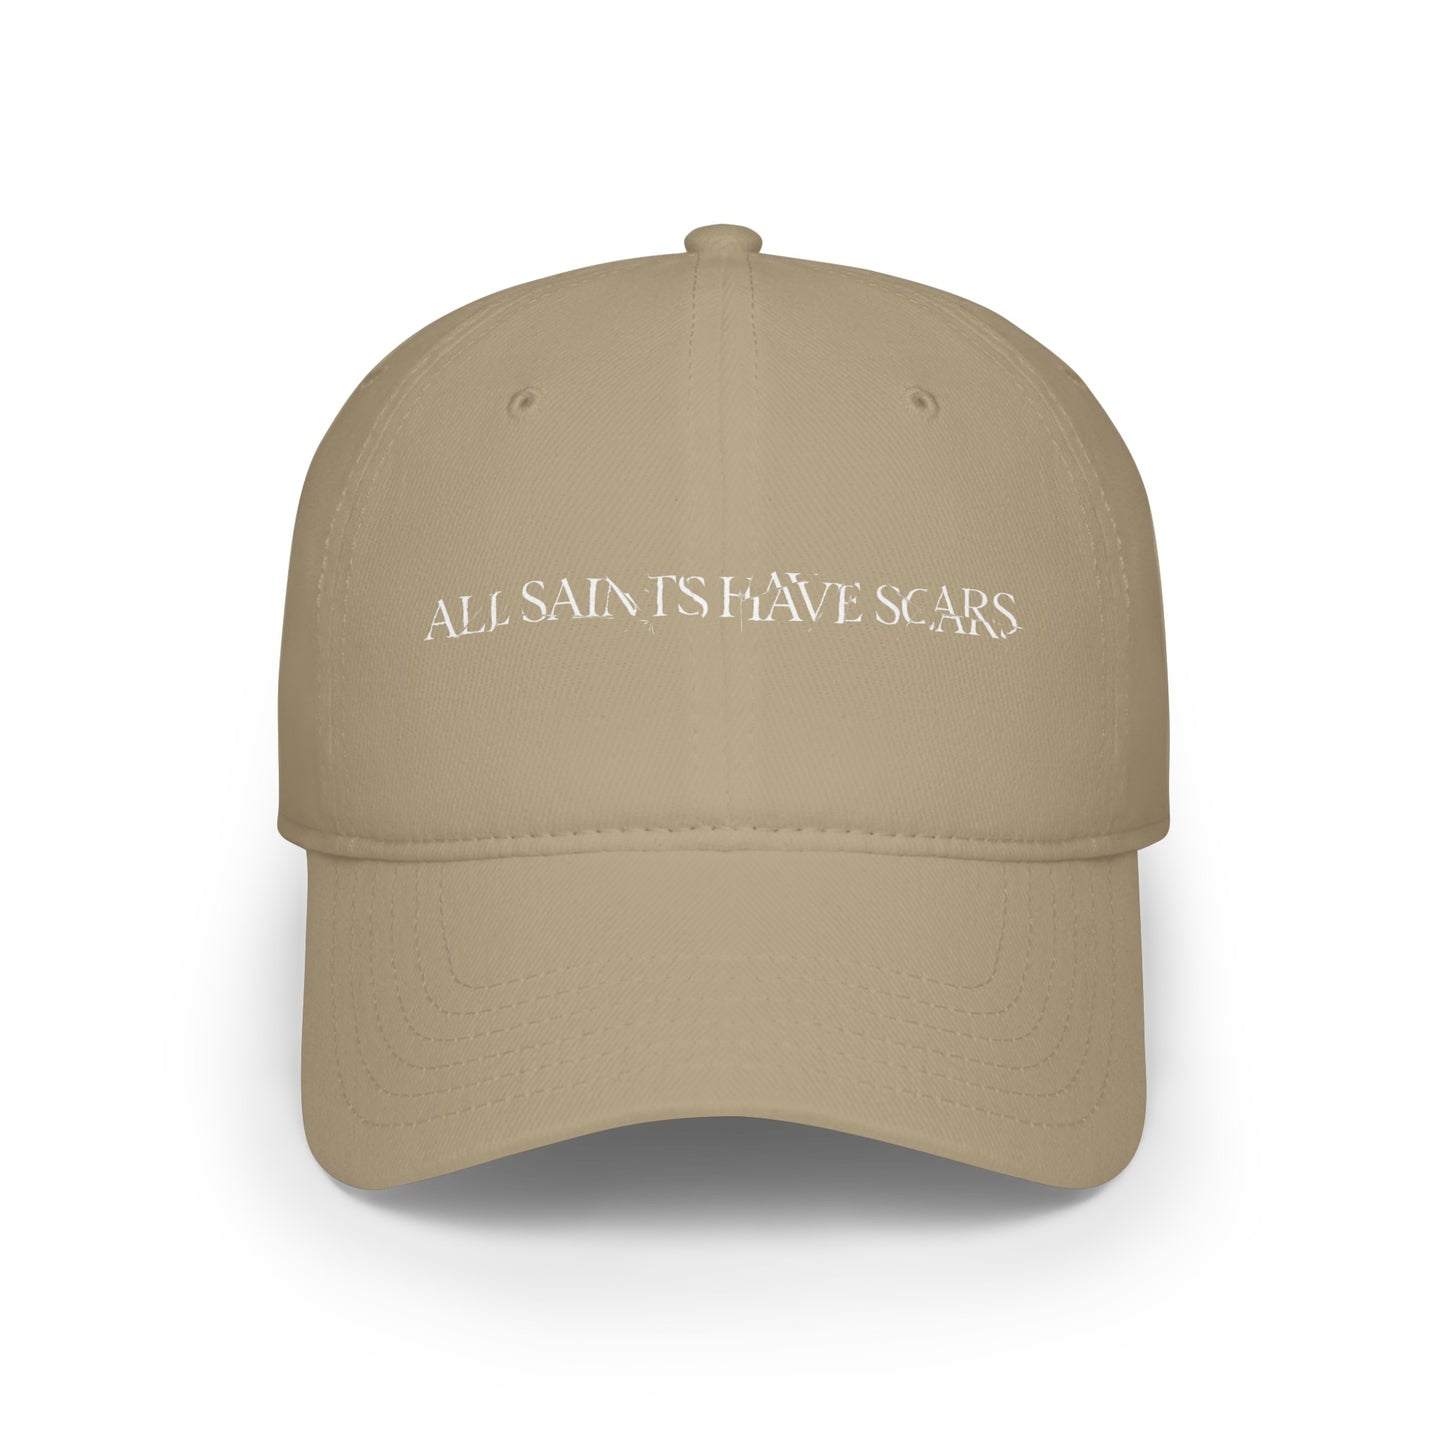 S&S ASHS Cracked Text Hat